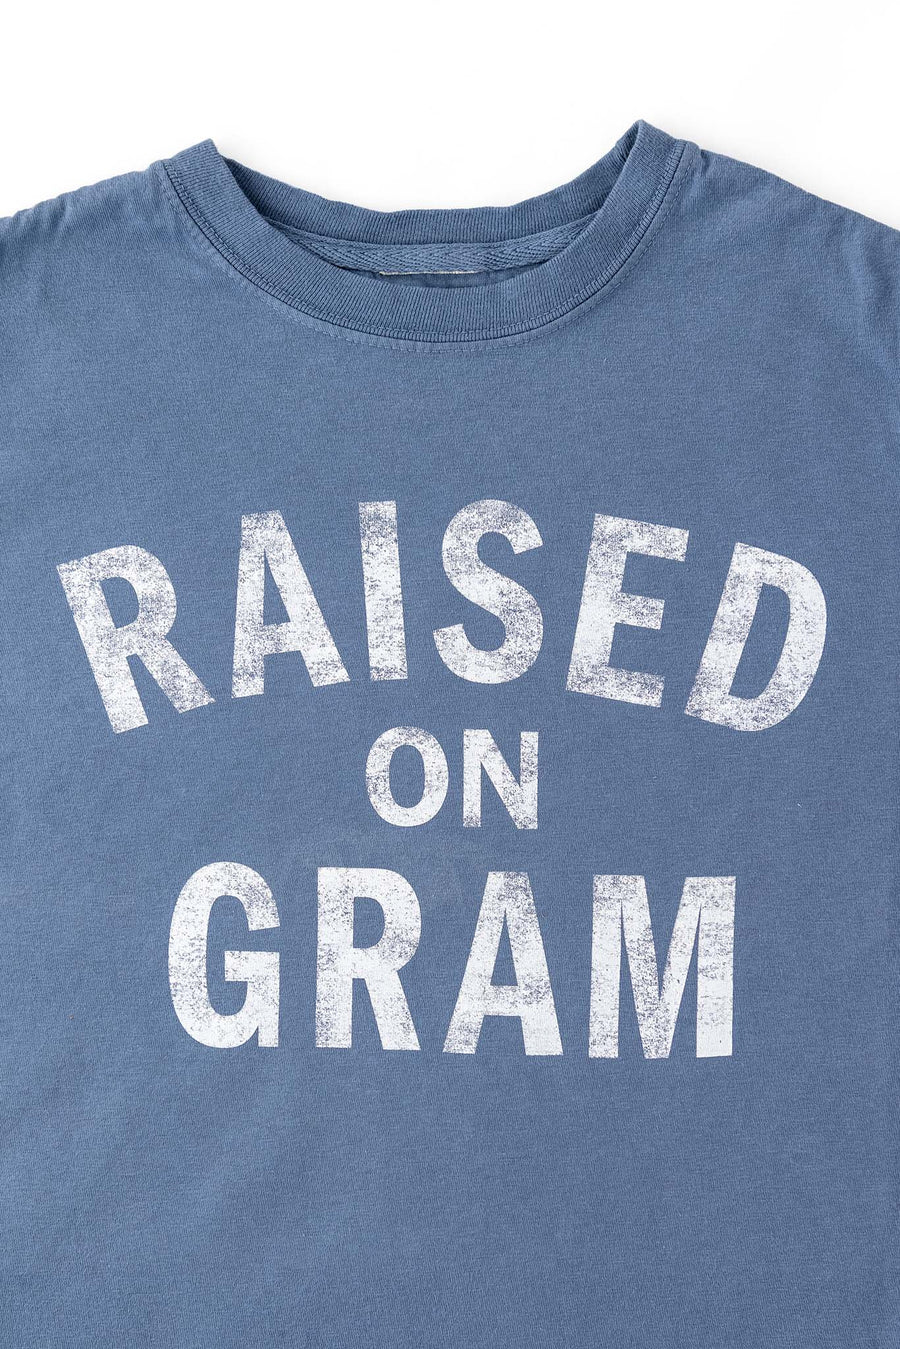 Close up view of blue graphic t-shirt for kids with white text "Raised on Gram"